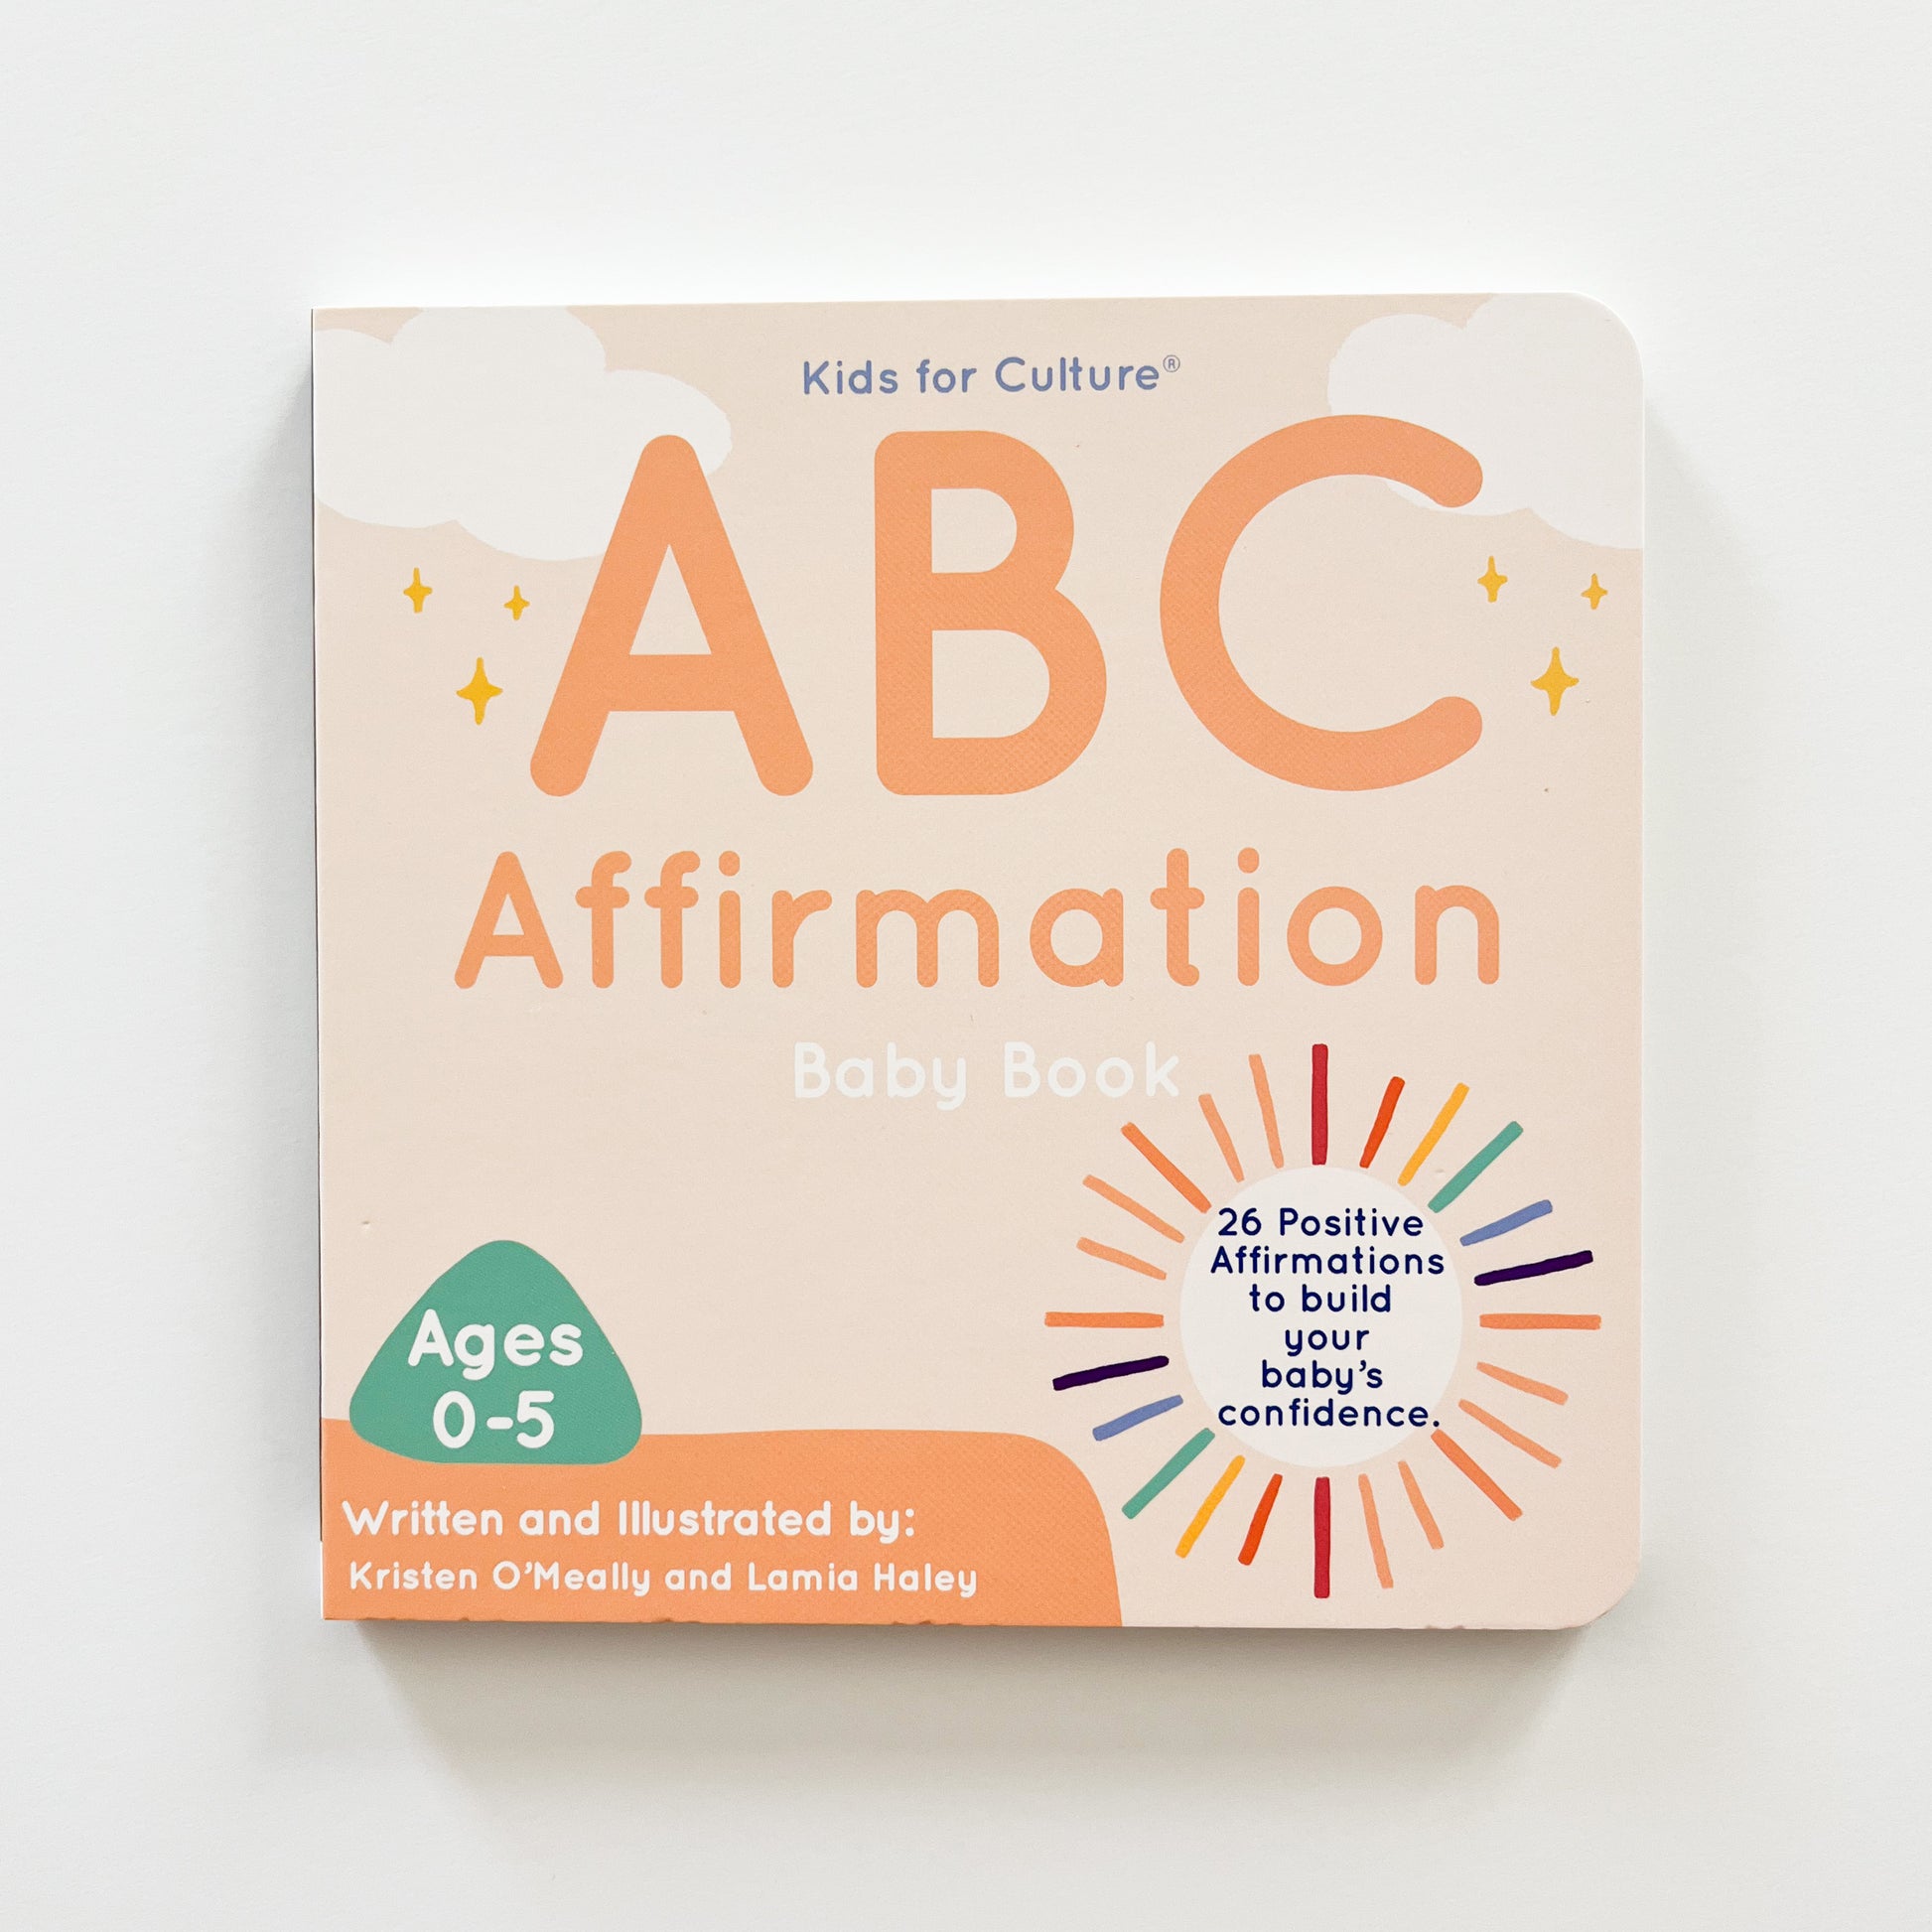 ABC affirmation baby book 